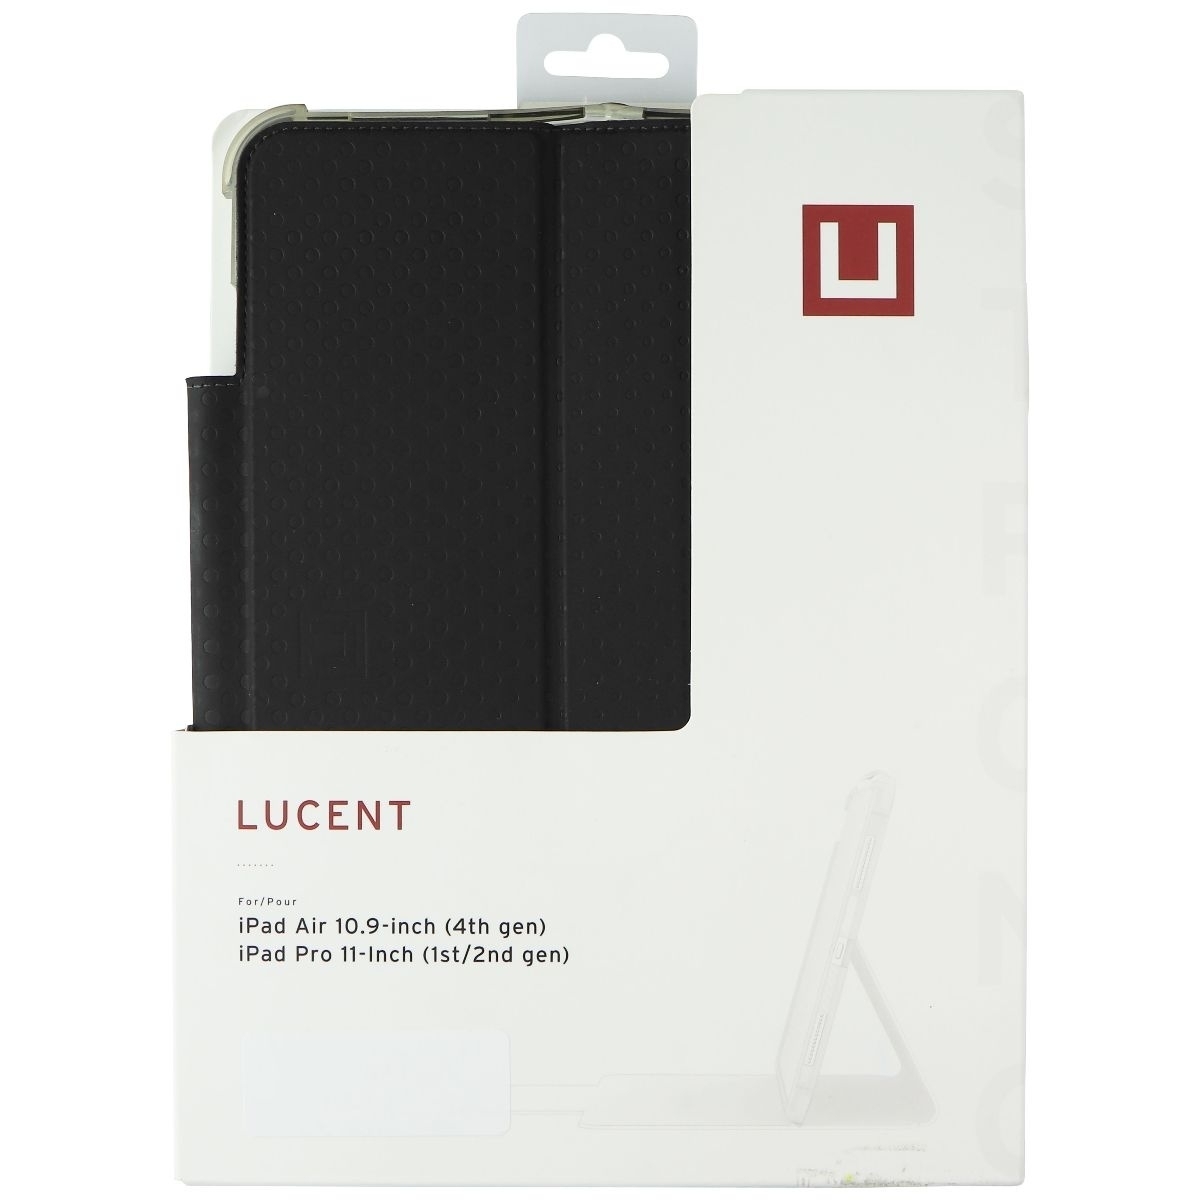 UAG Lucent Case For IPad Air 10.9-in (4th Gen)/Pro 11-in (1st/2nd Gen) - Black